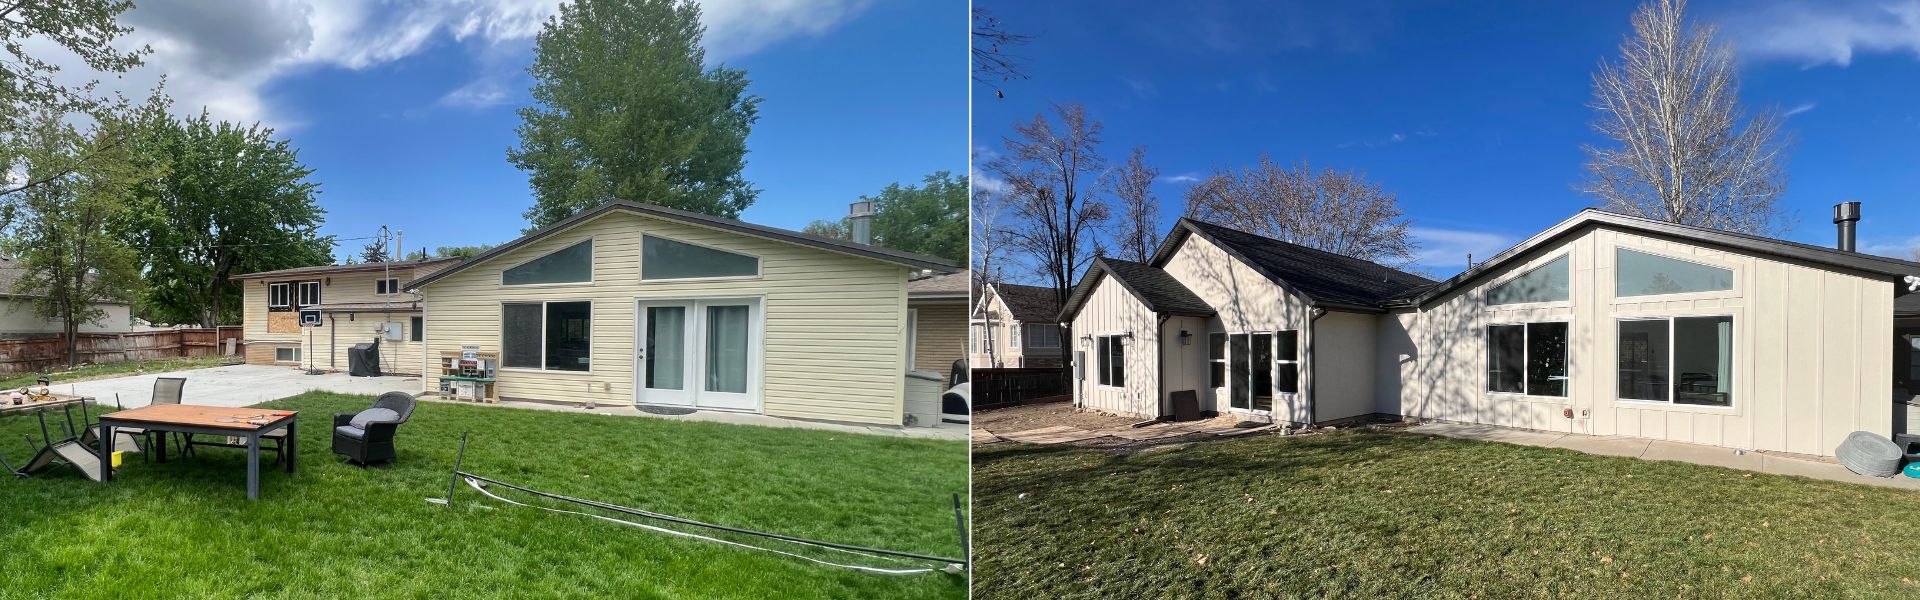 Before After Back Siebers Home Addition Renovation by Topp Remodeling & Construction